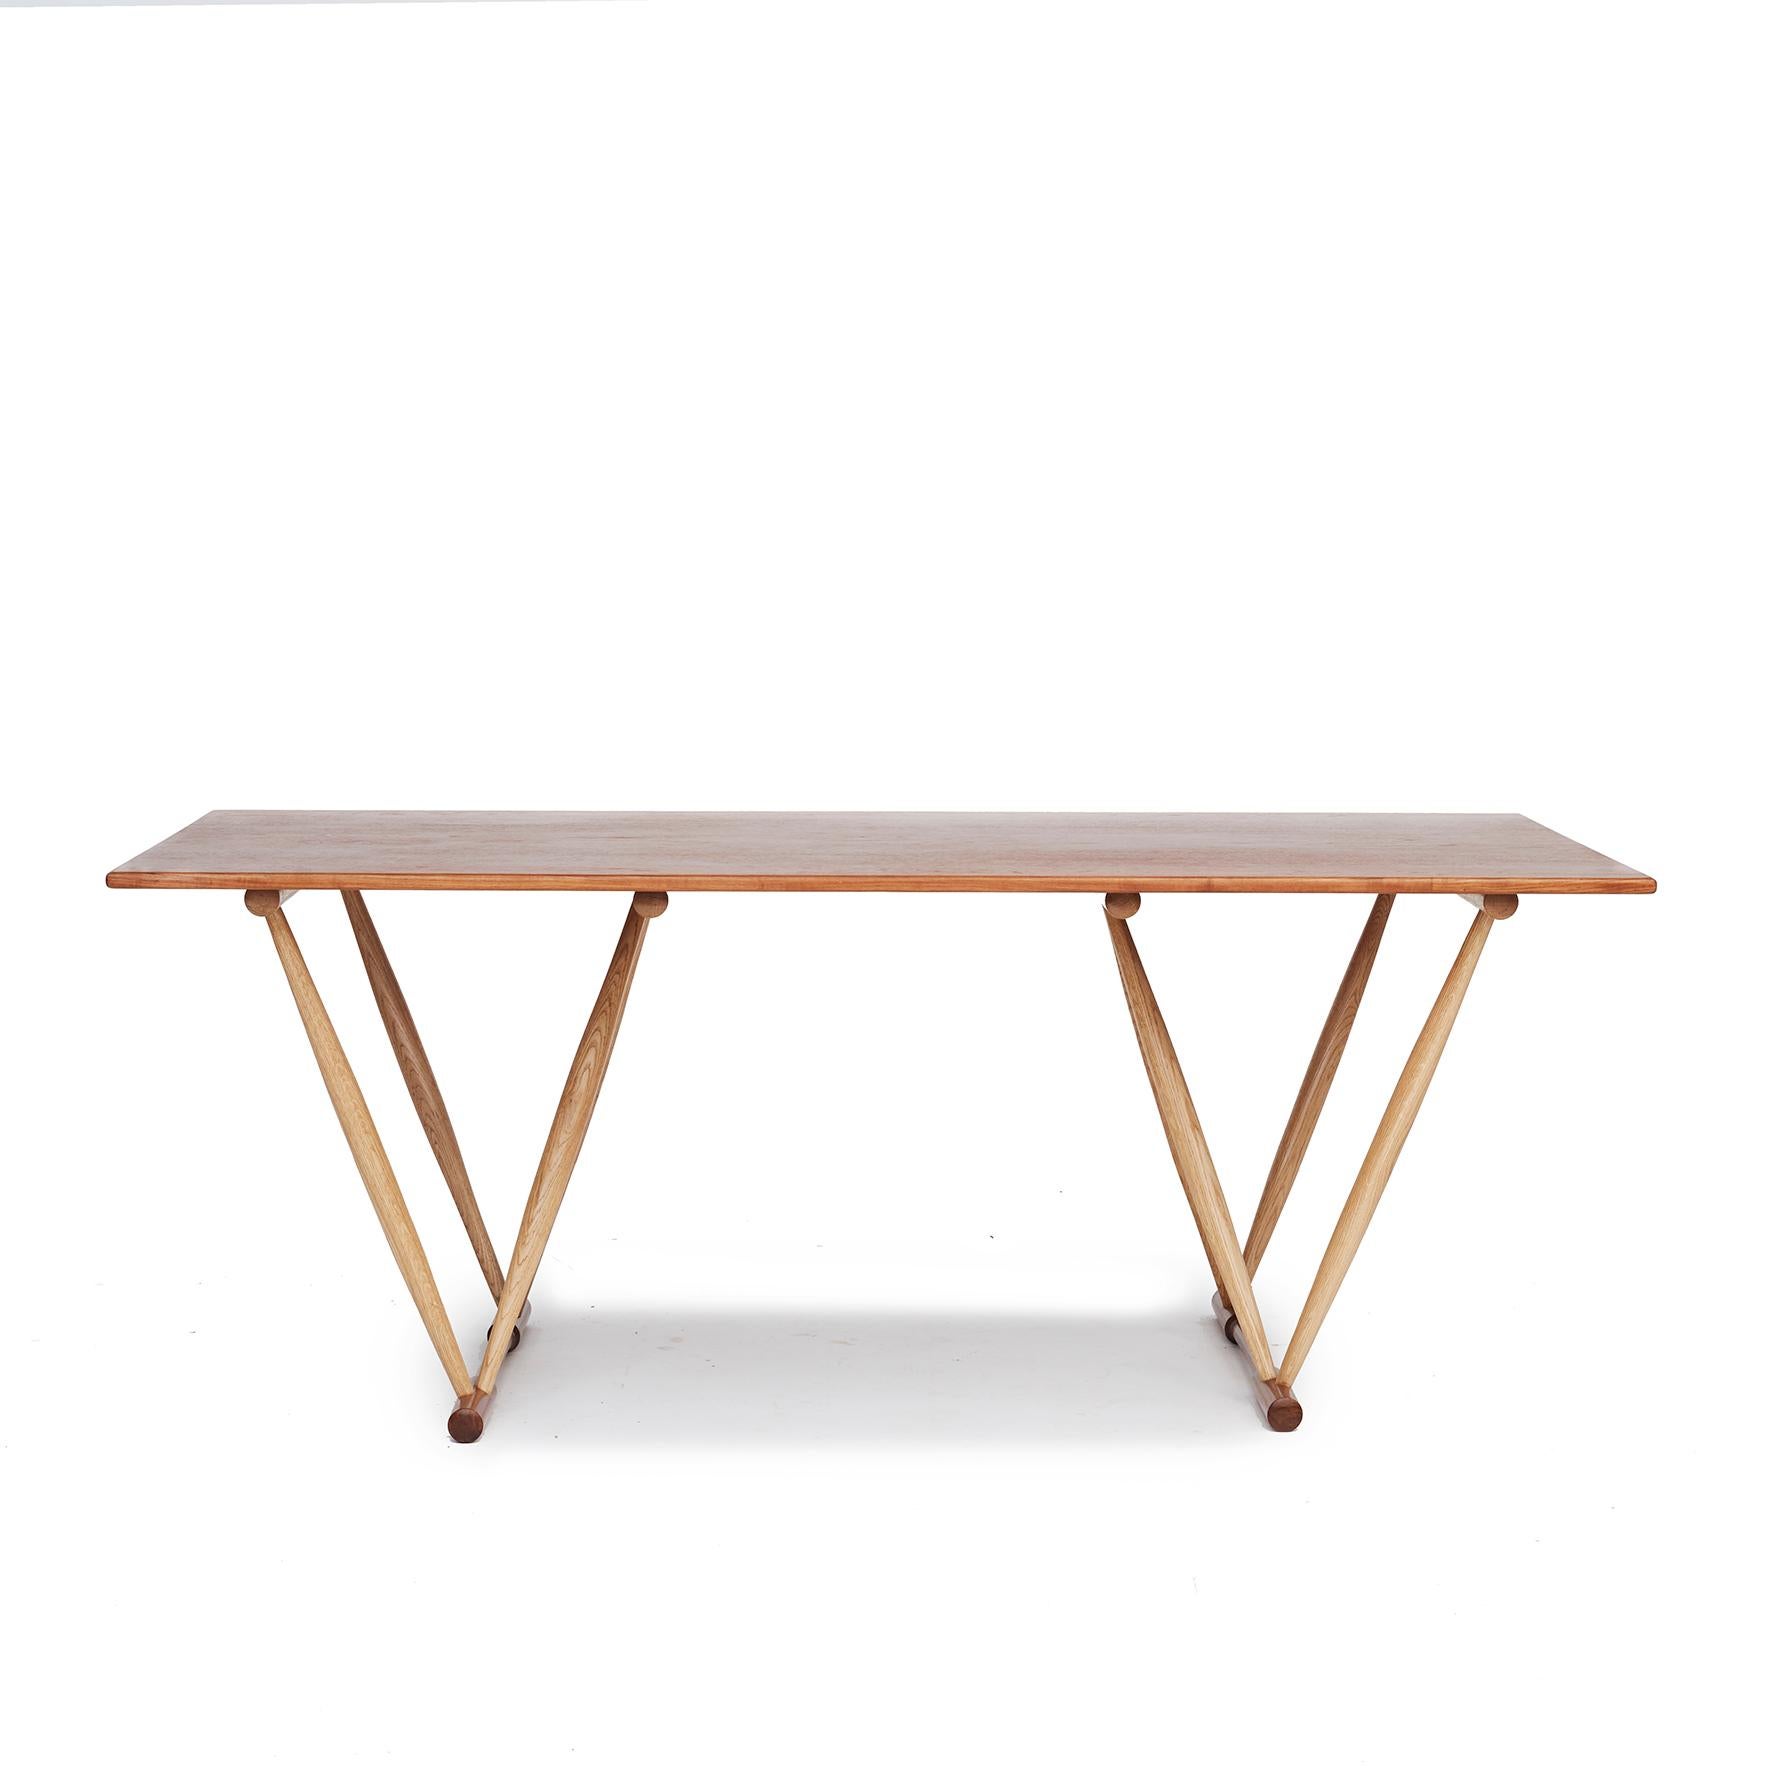 Frode Holm.
Work table / dining table with sculptural V-shaped frame and a rectangular top.

Table top in solid teak, legs in oak finished with teak floor stretchers.

Designed 1944. Manufactured for retailer Illums Bolighus.
Denmark 1960-1970.